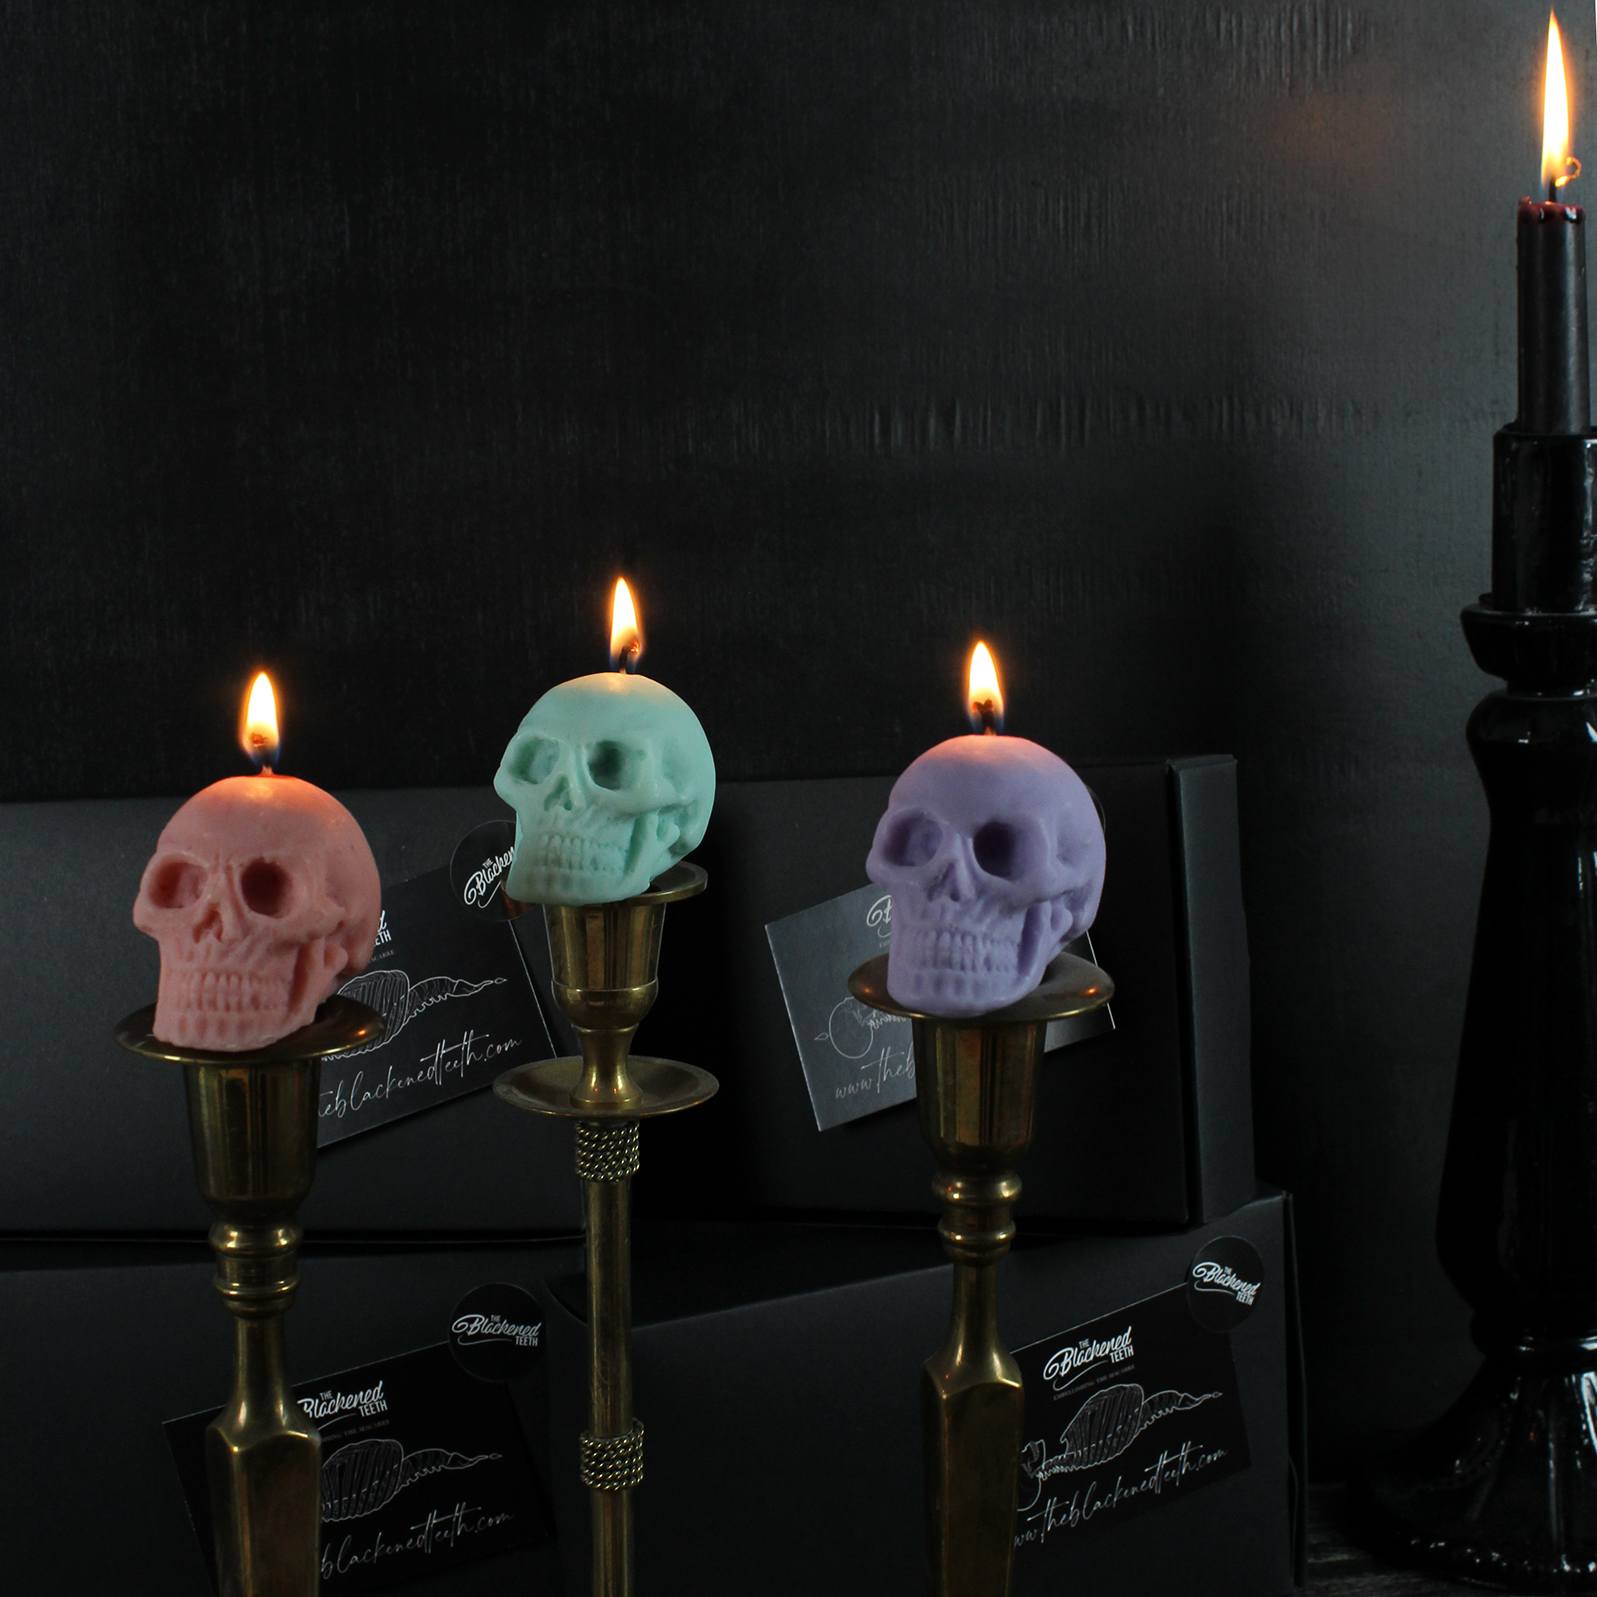 Small skull pastel candles - gothic decor - The Blackened Teeth